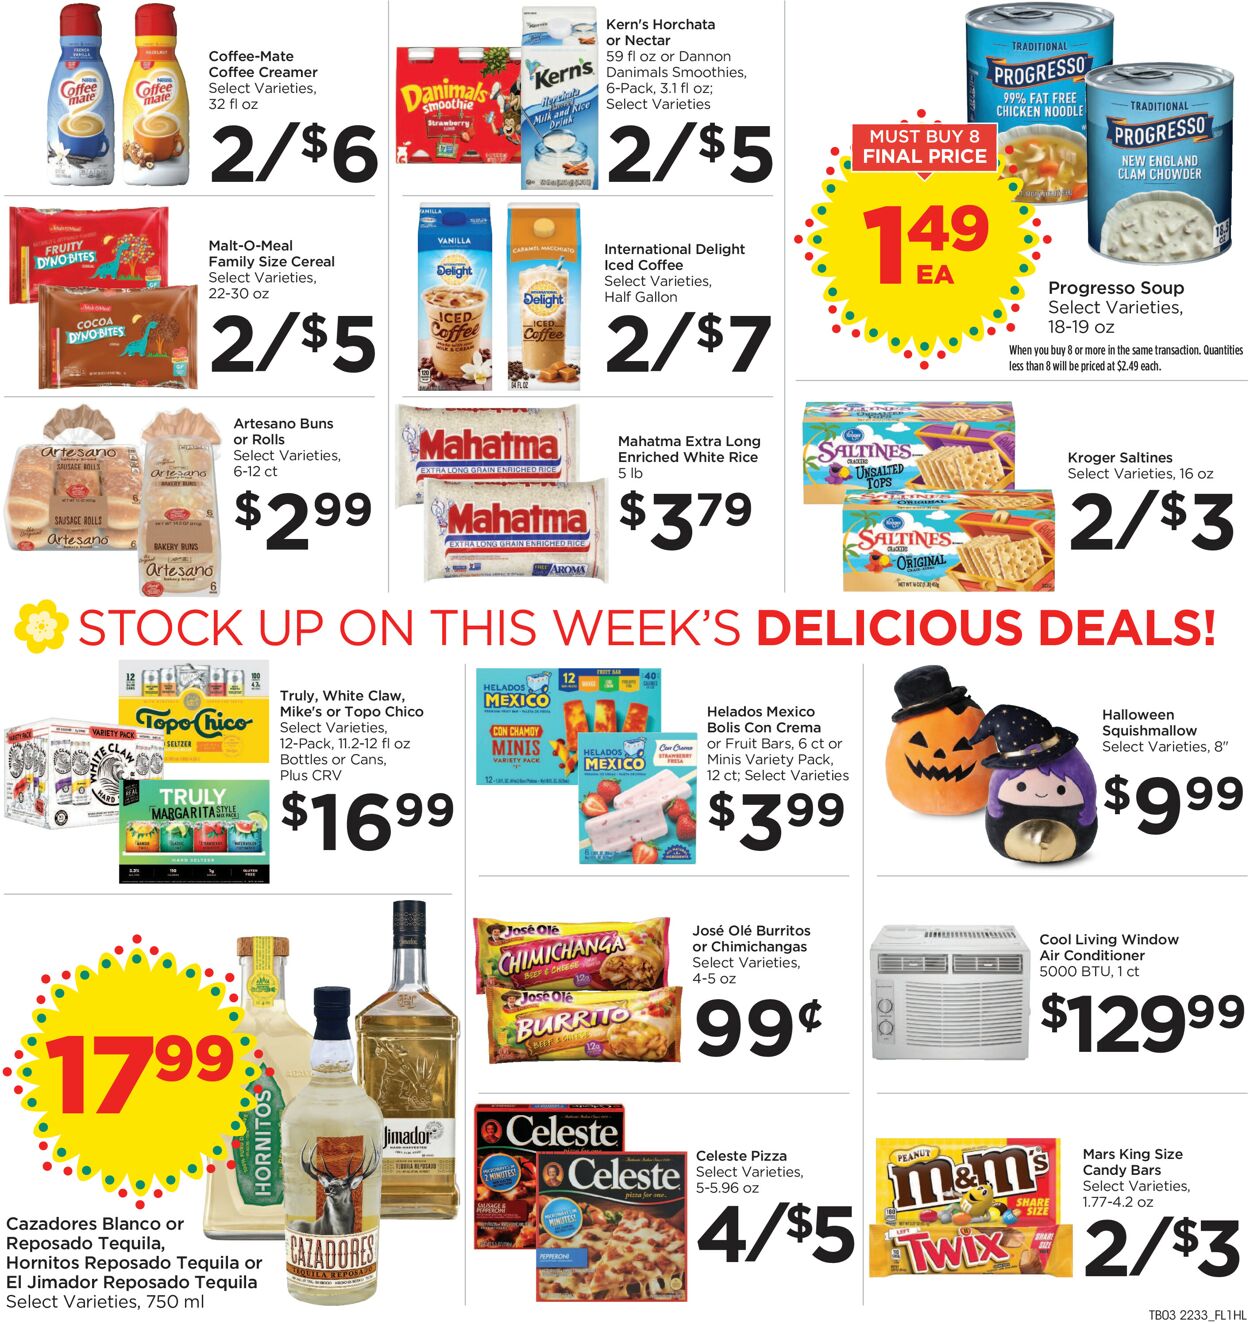 Catalogue Food 4 Less from 09/14/2022